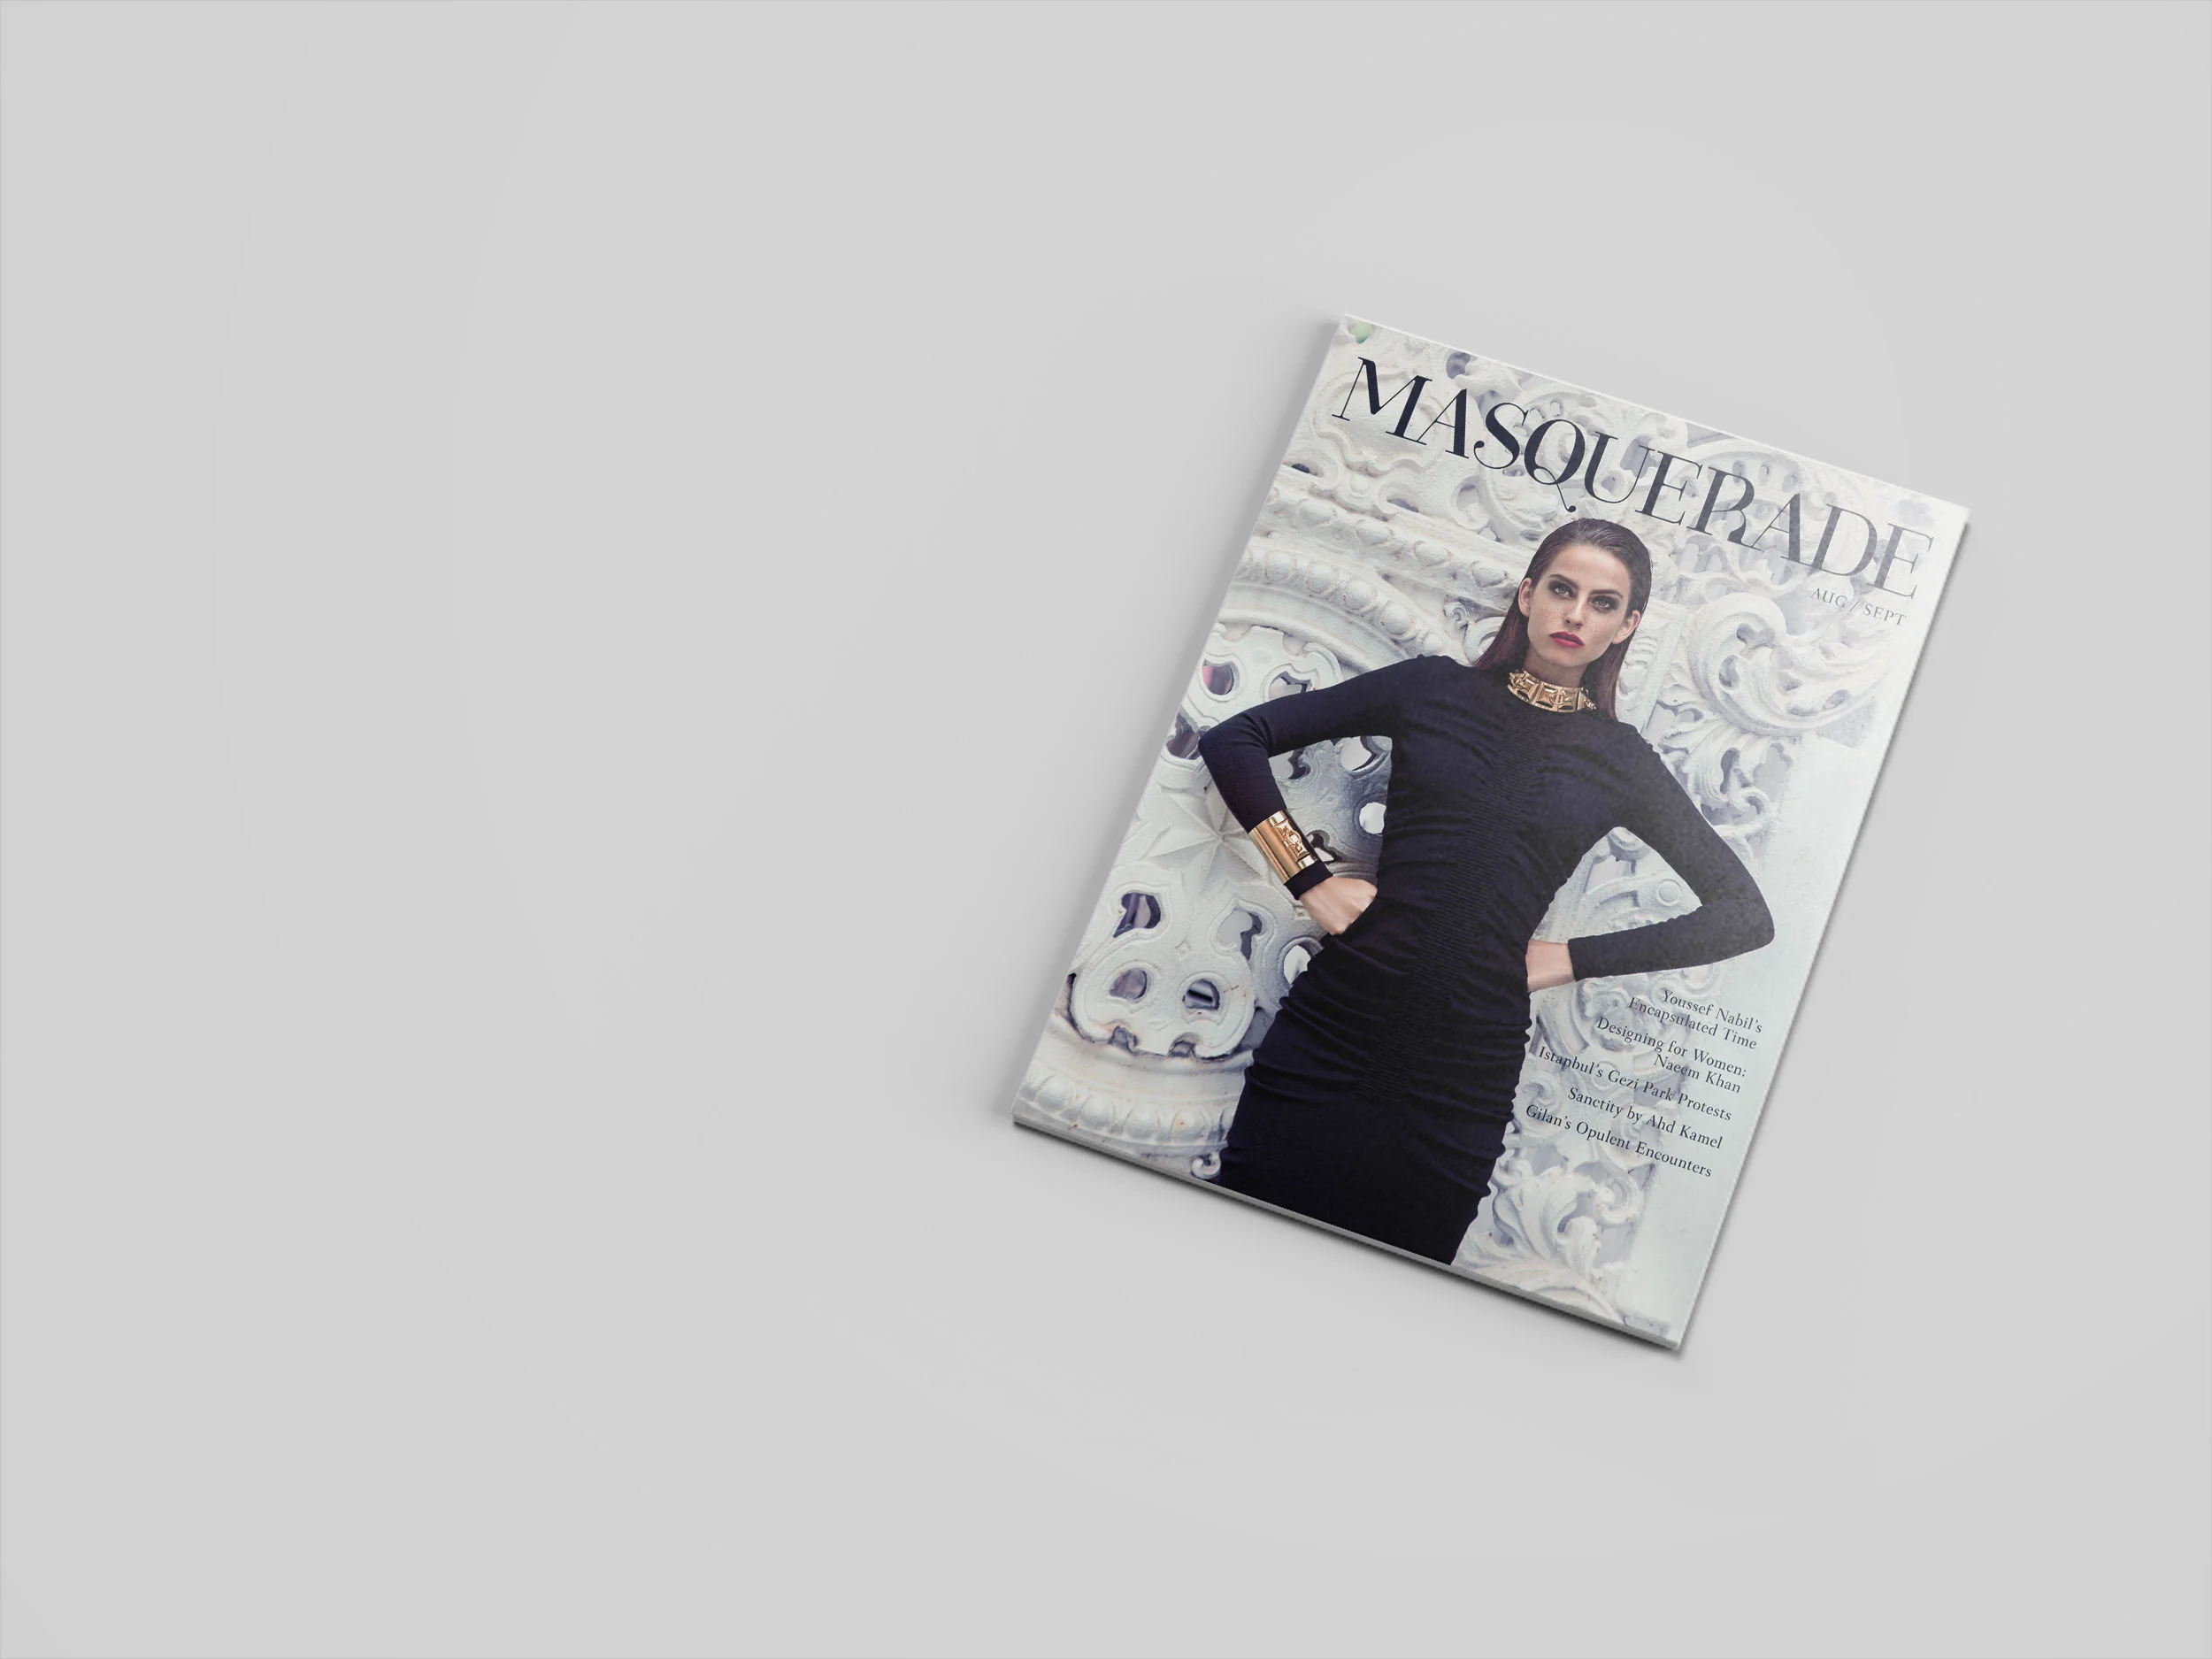 The cover of the August September Masquerade Magazine shows a woman wearing black holding a power pose